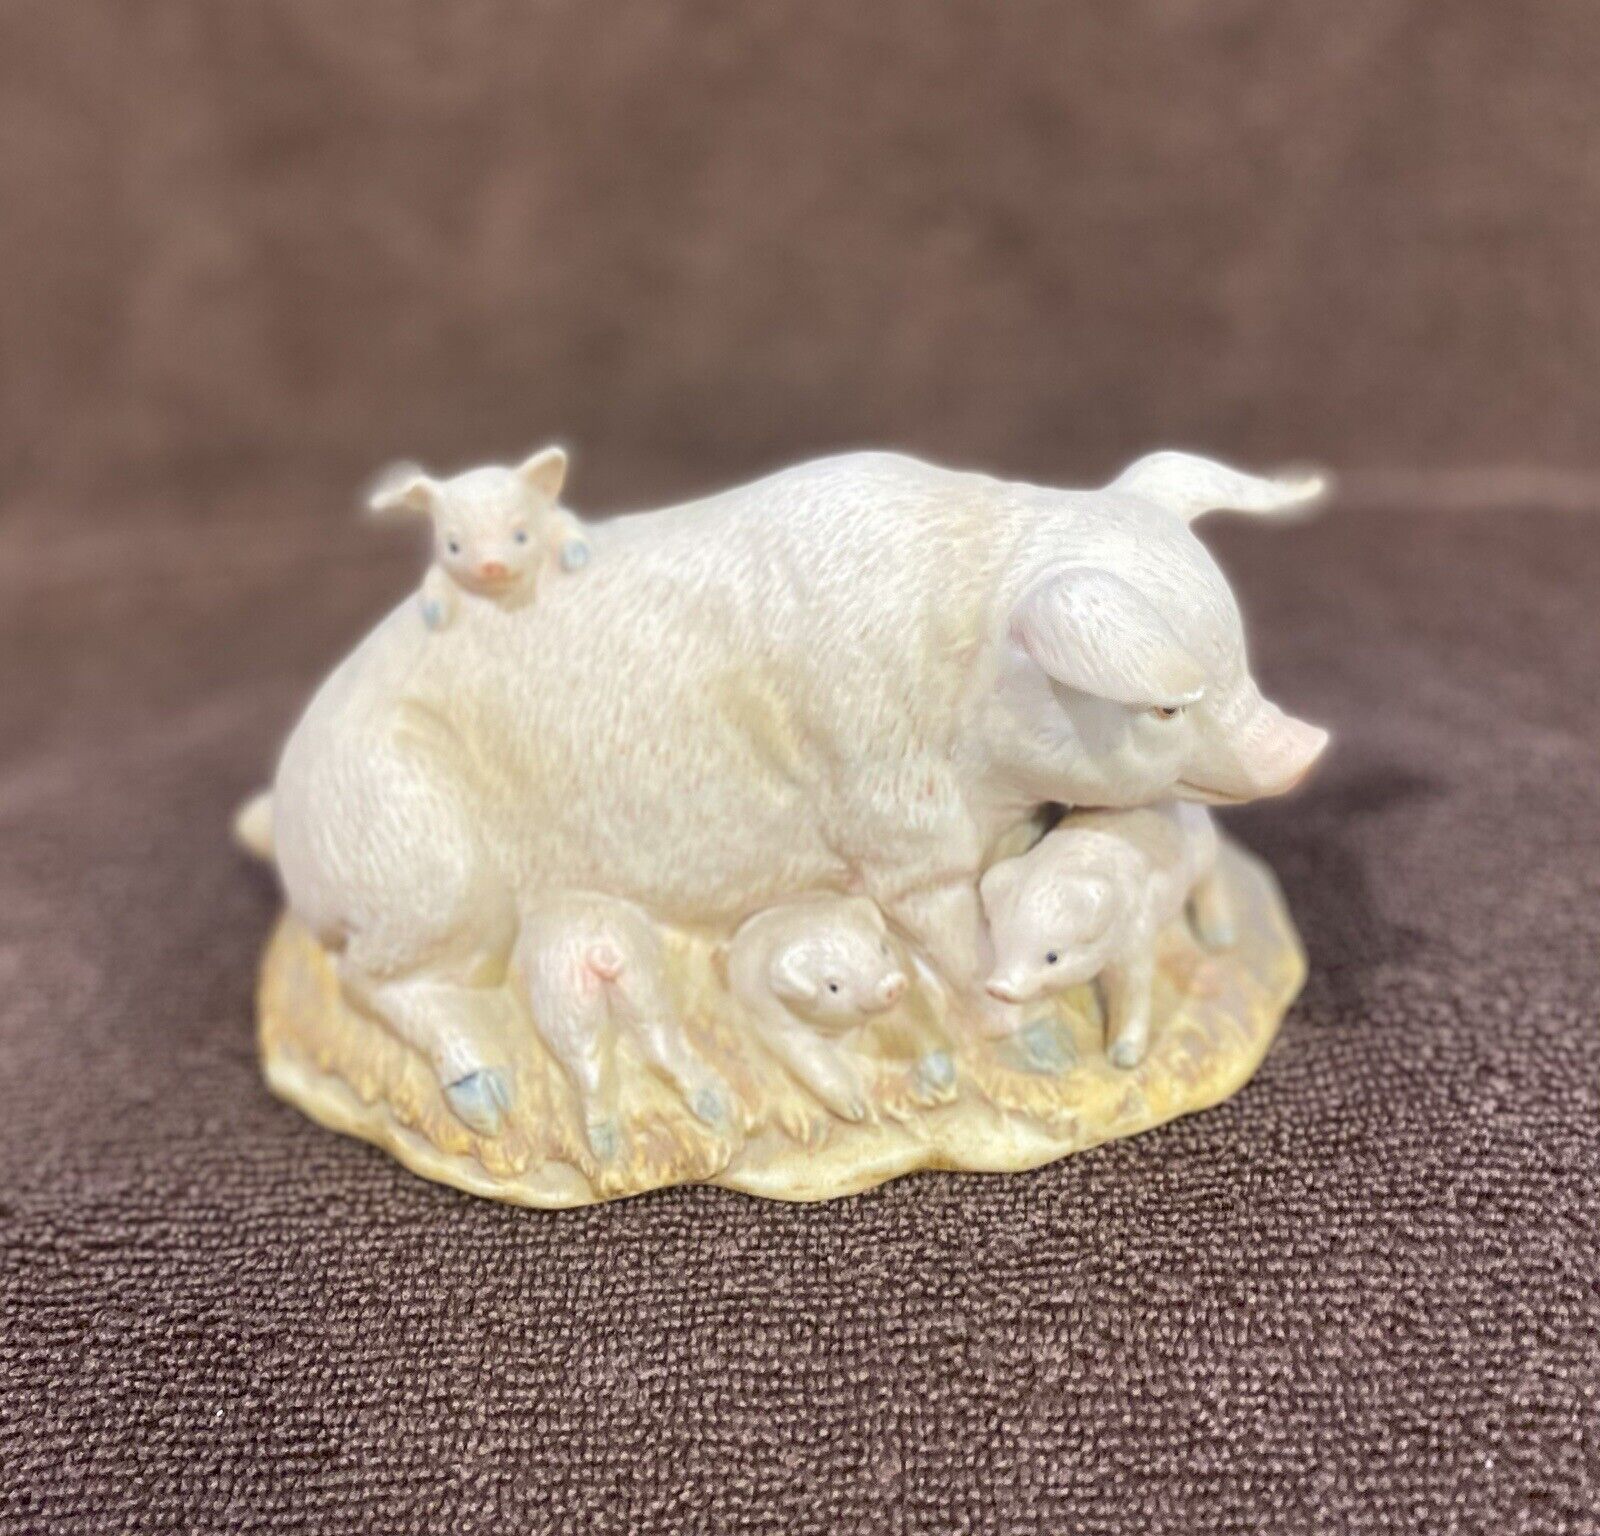 Pre Owned Vintage Homco Ceramic Pig Playing With Piglets Figurine #1443